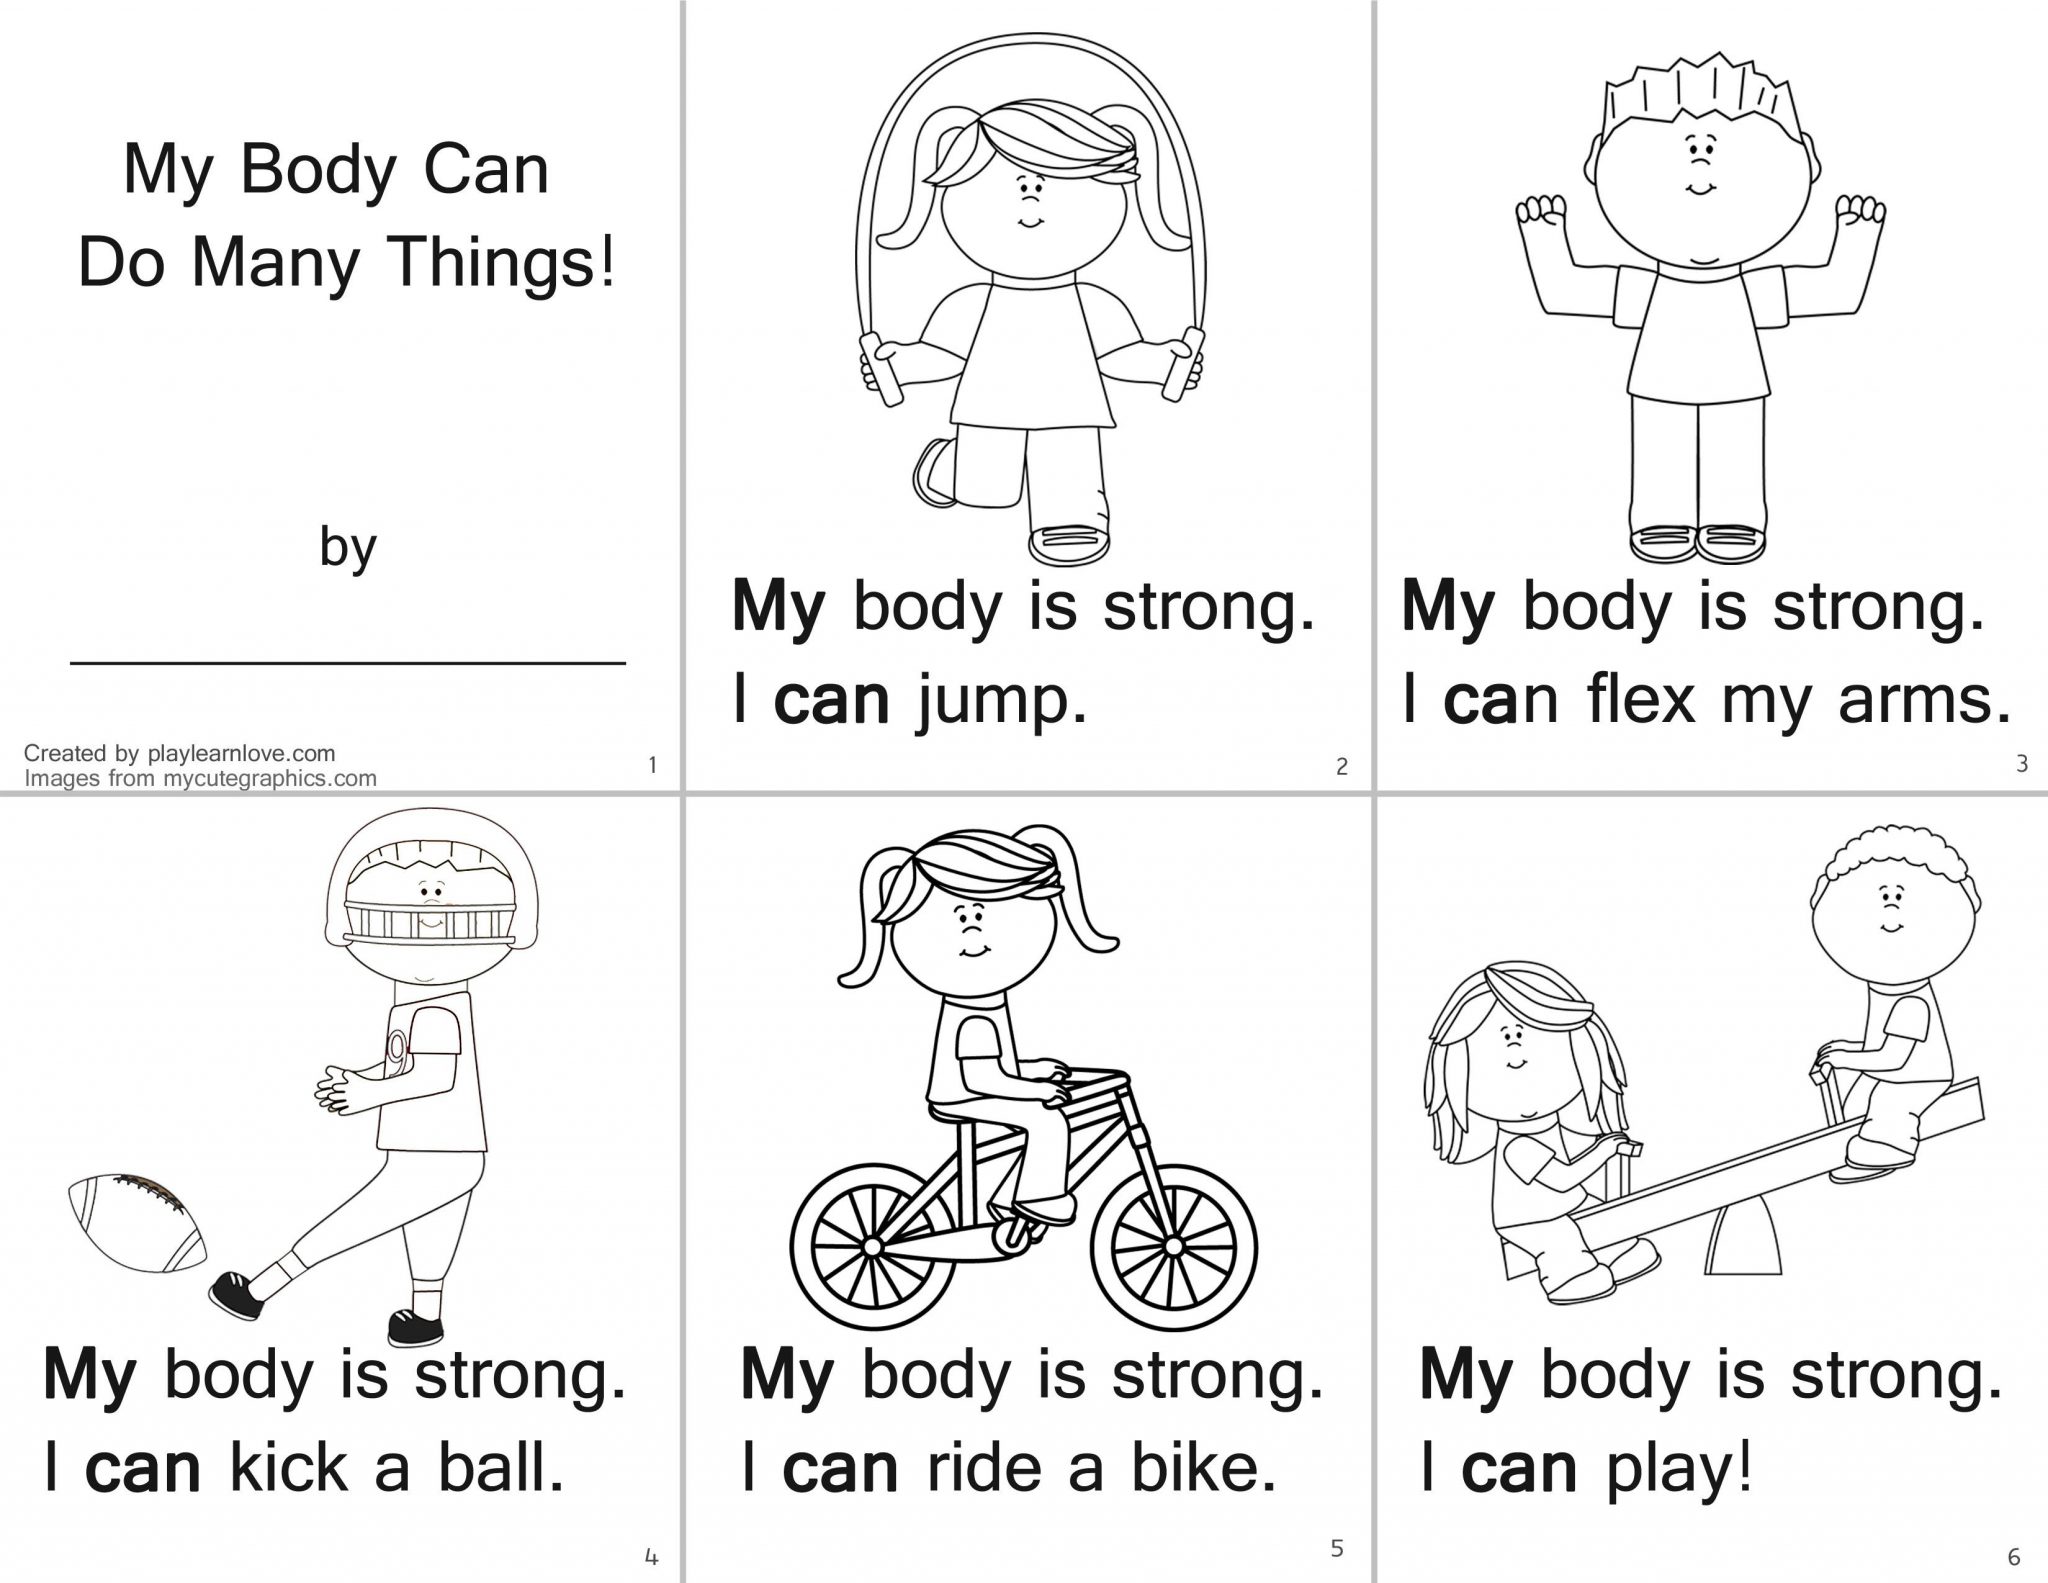 all-about-me-my-body-emergent-reader-preschool-reading-lesson-plans-learning